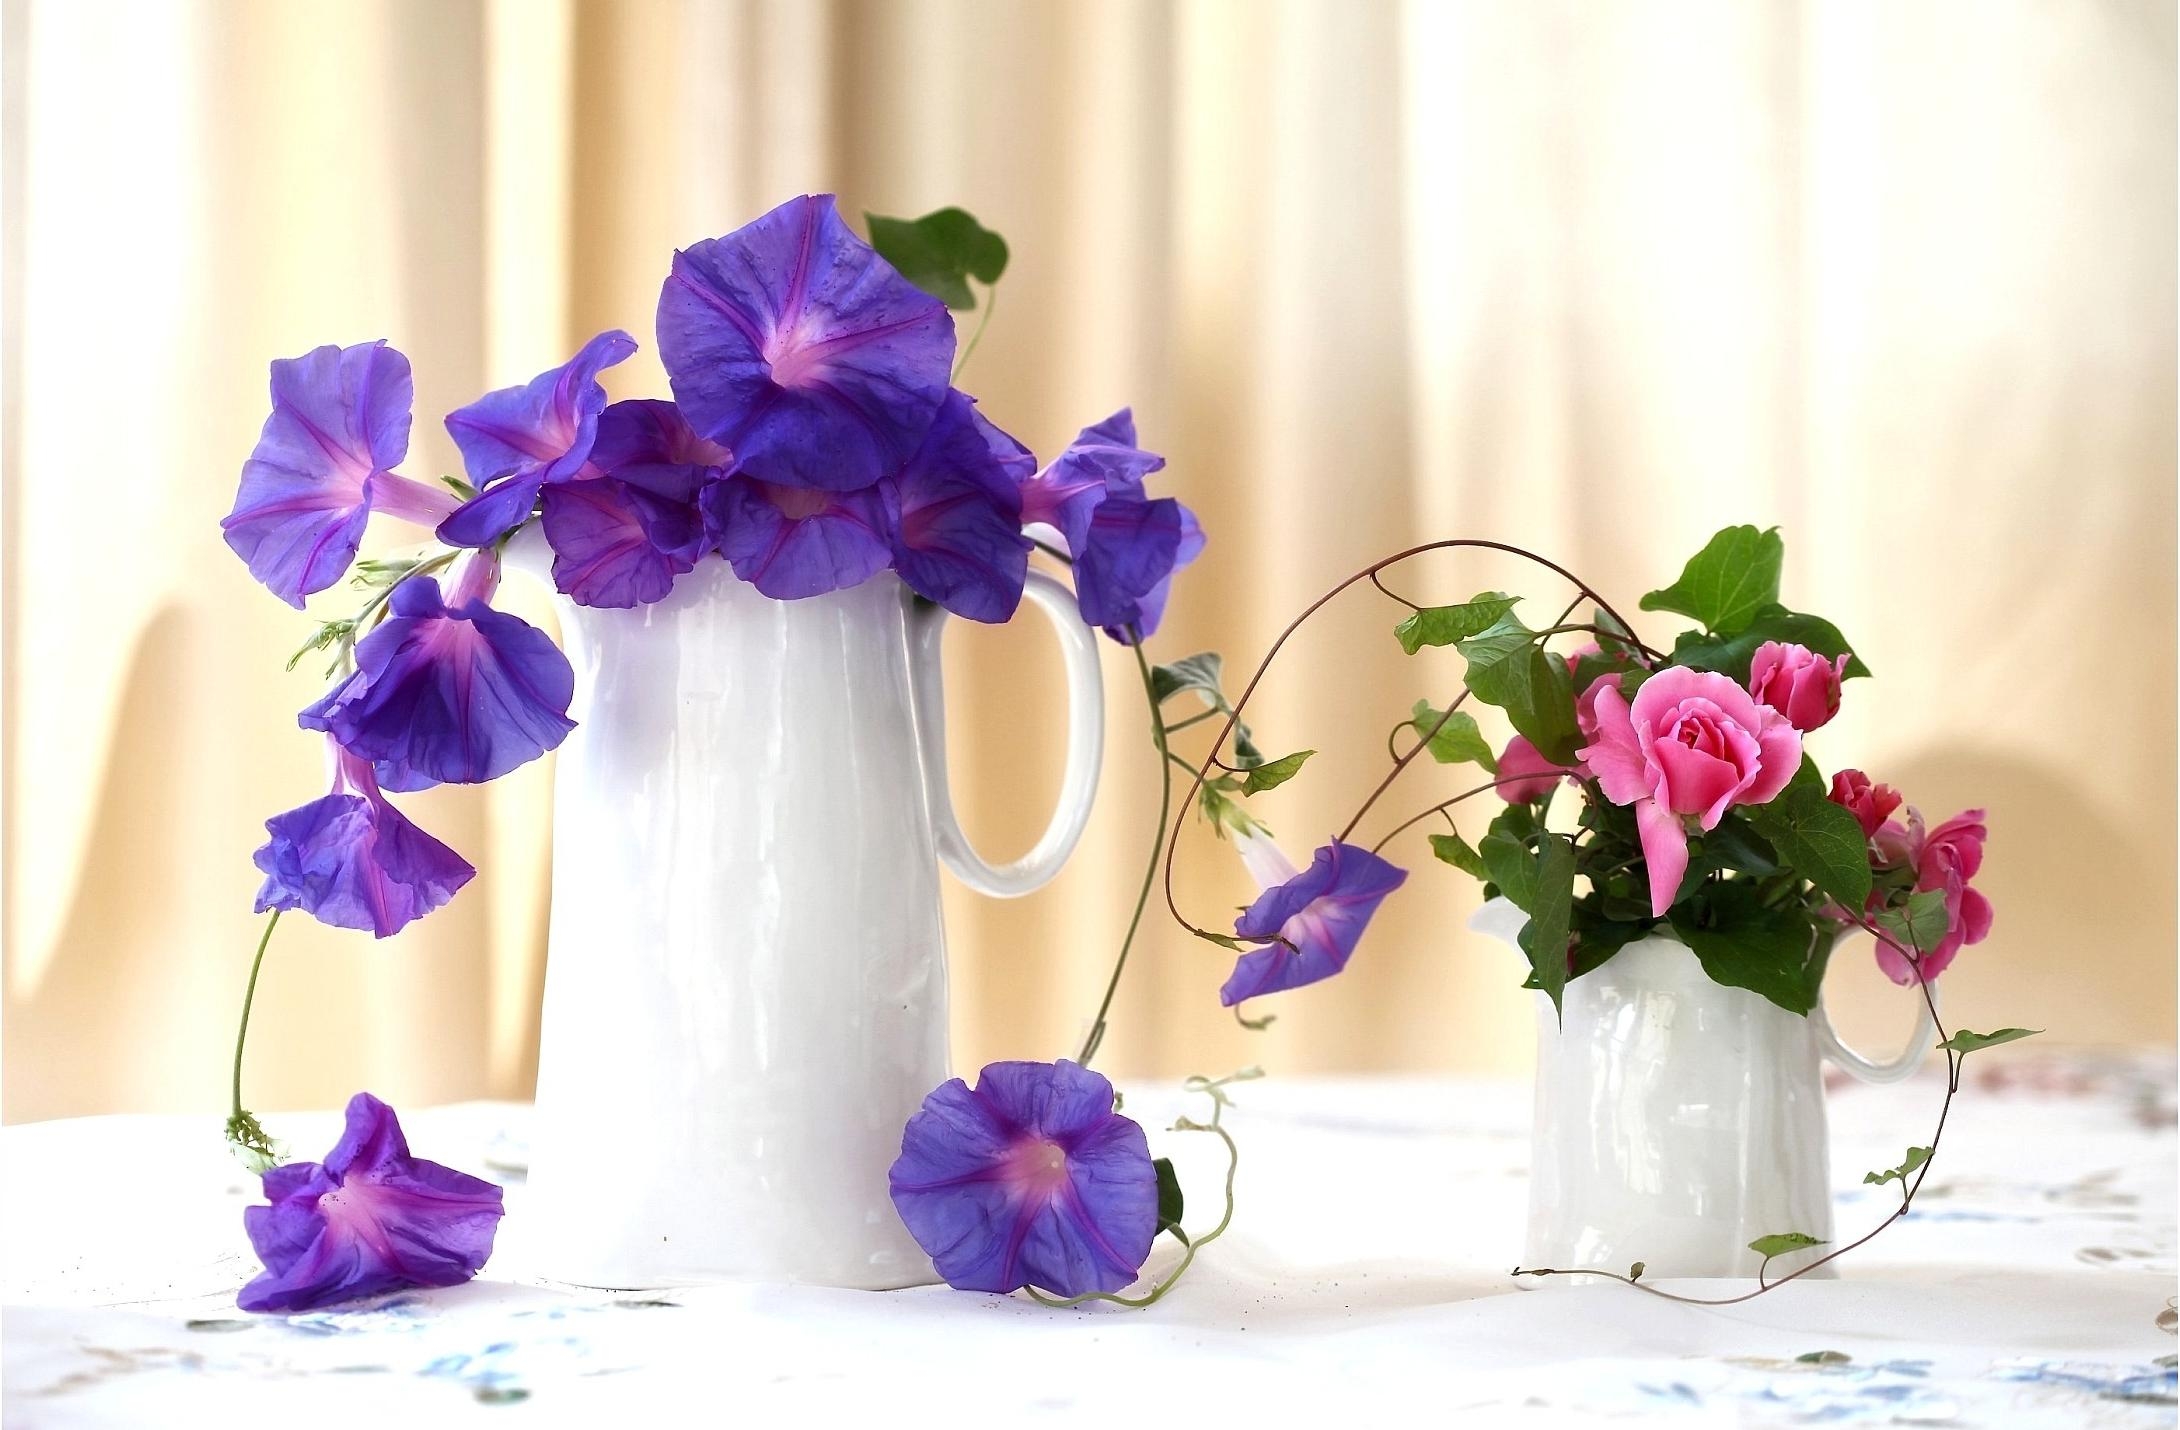 morning glory, handsomely, roses, flowers, composition, it's beautiful, jugs, ipme